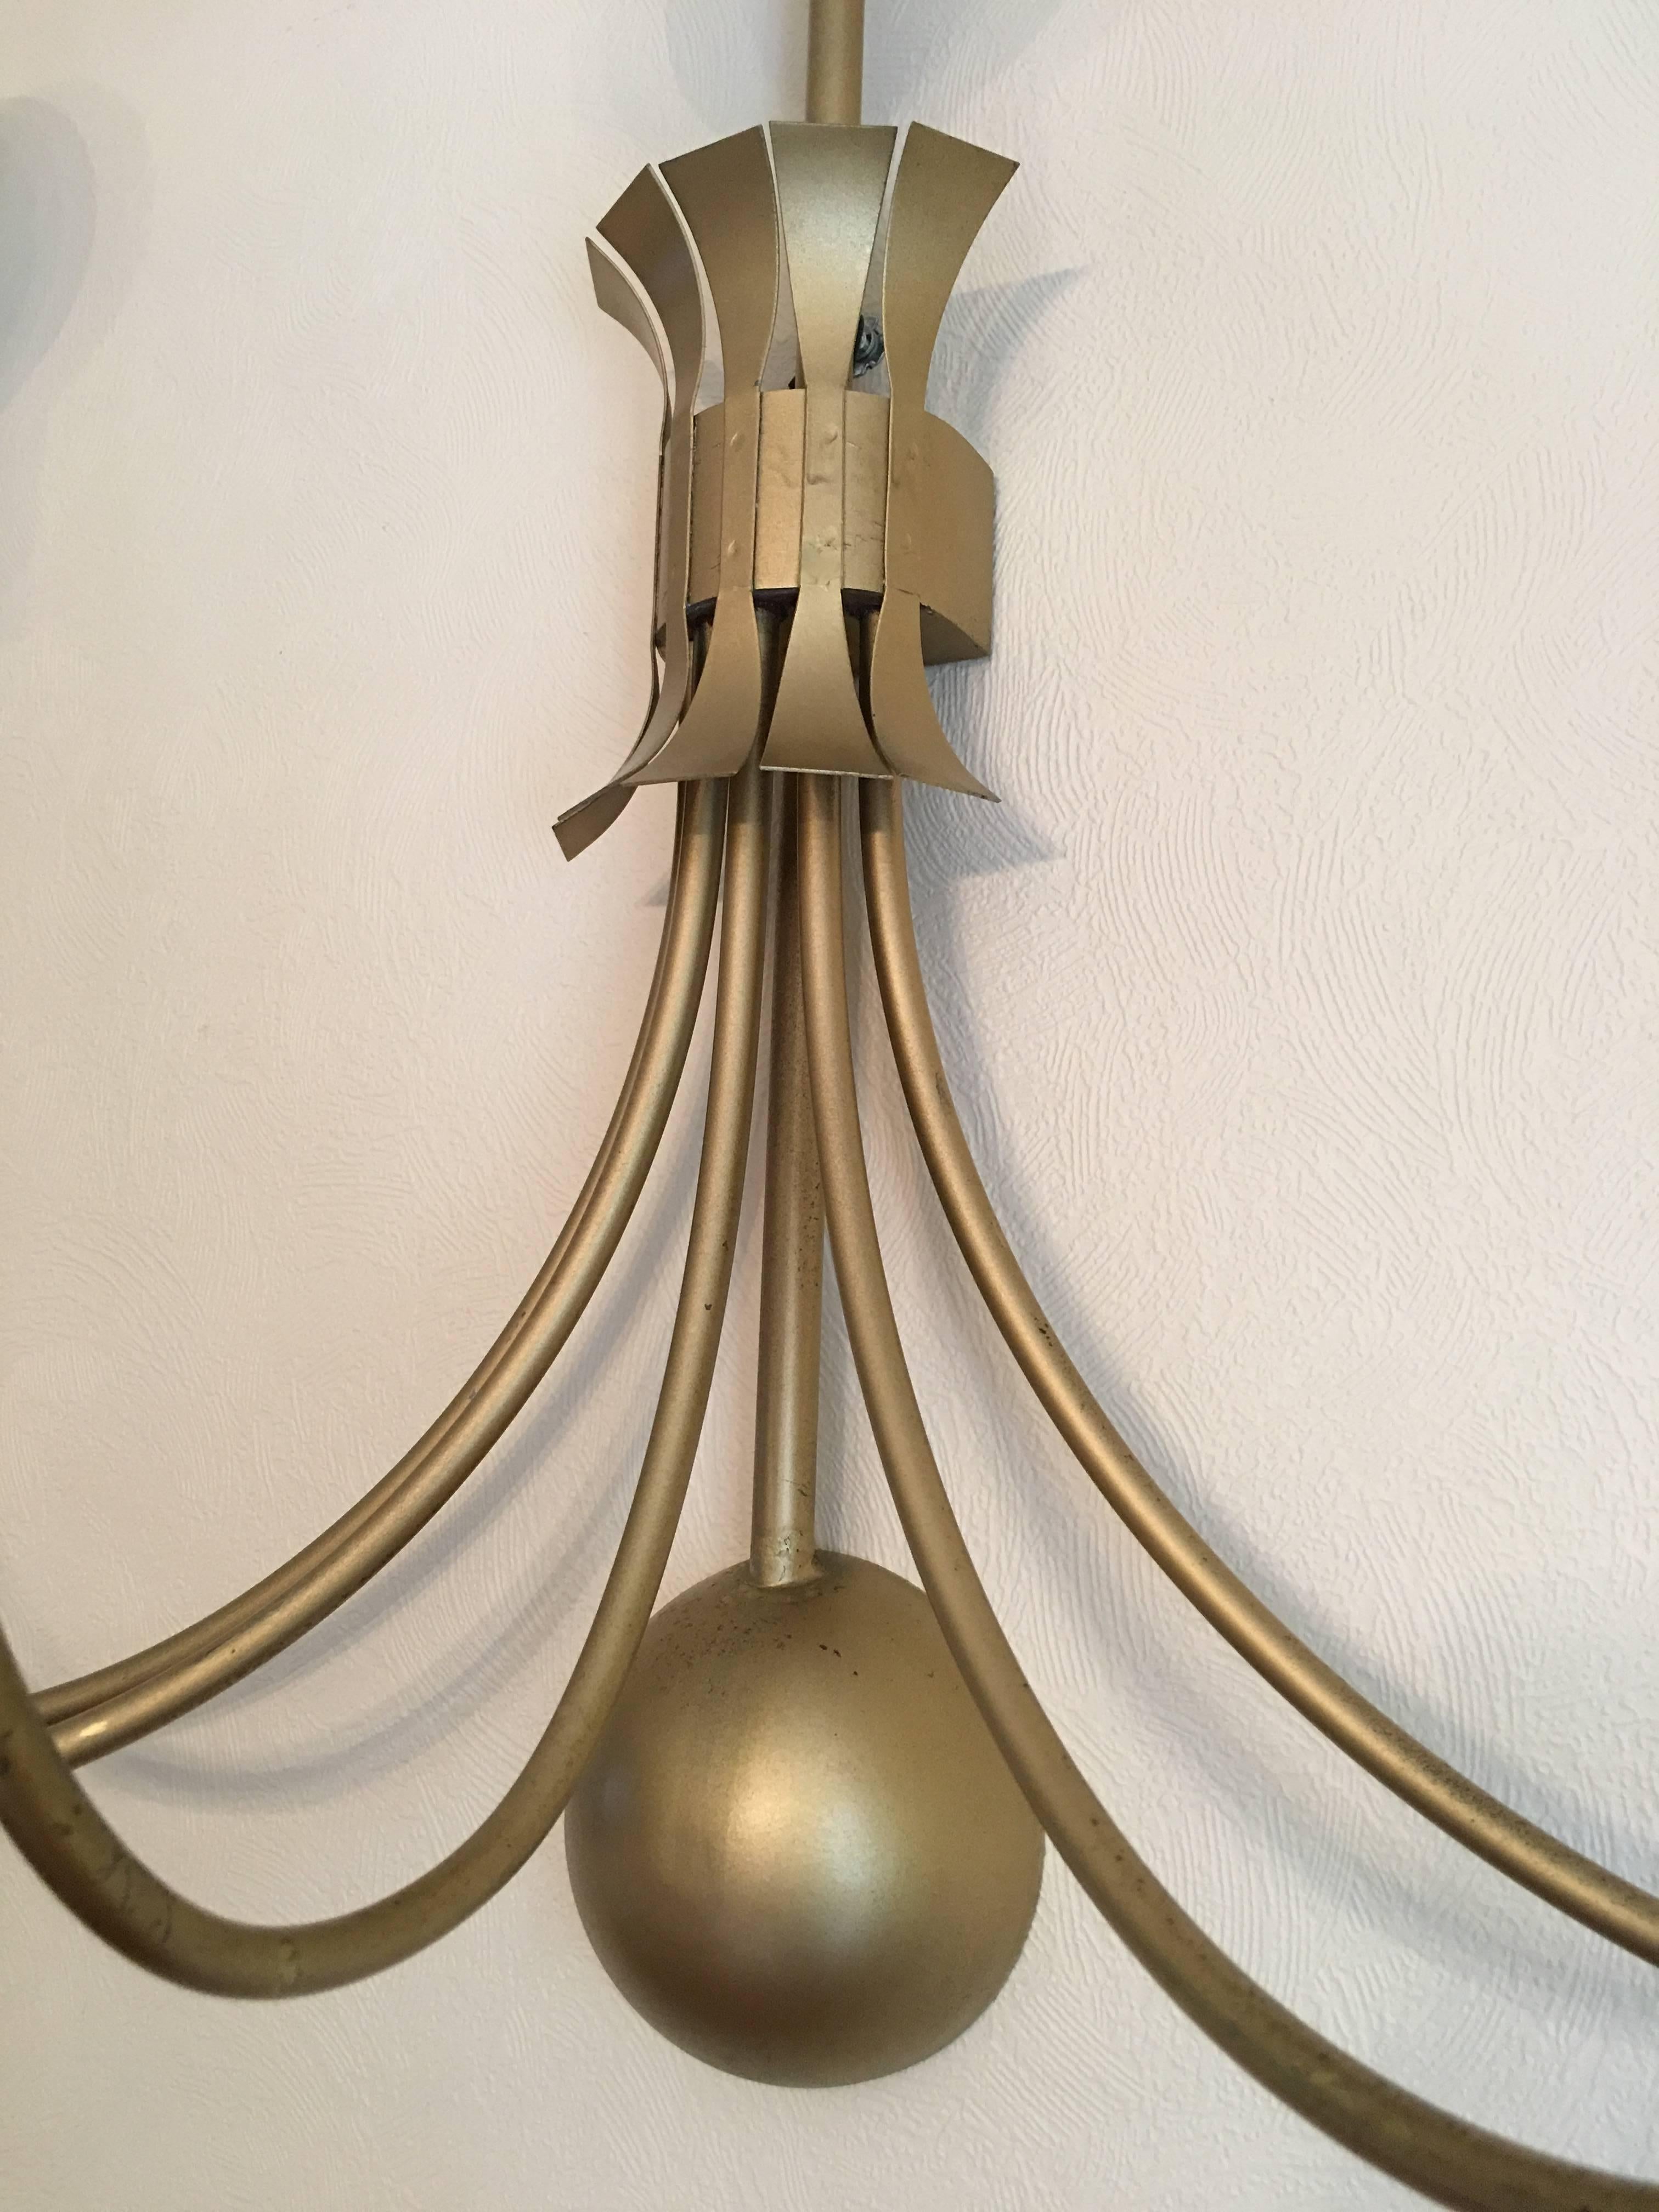 Four Monumental French Theater Sconces, Five Gilt Metal Curved Arms - 1950s For Sale 2